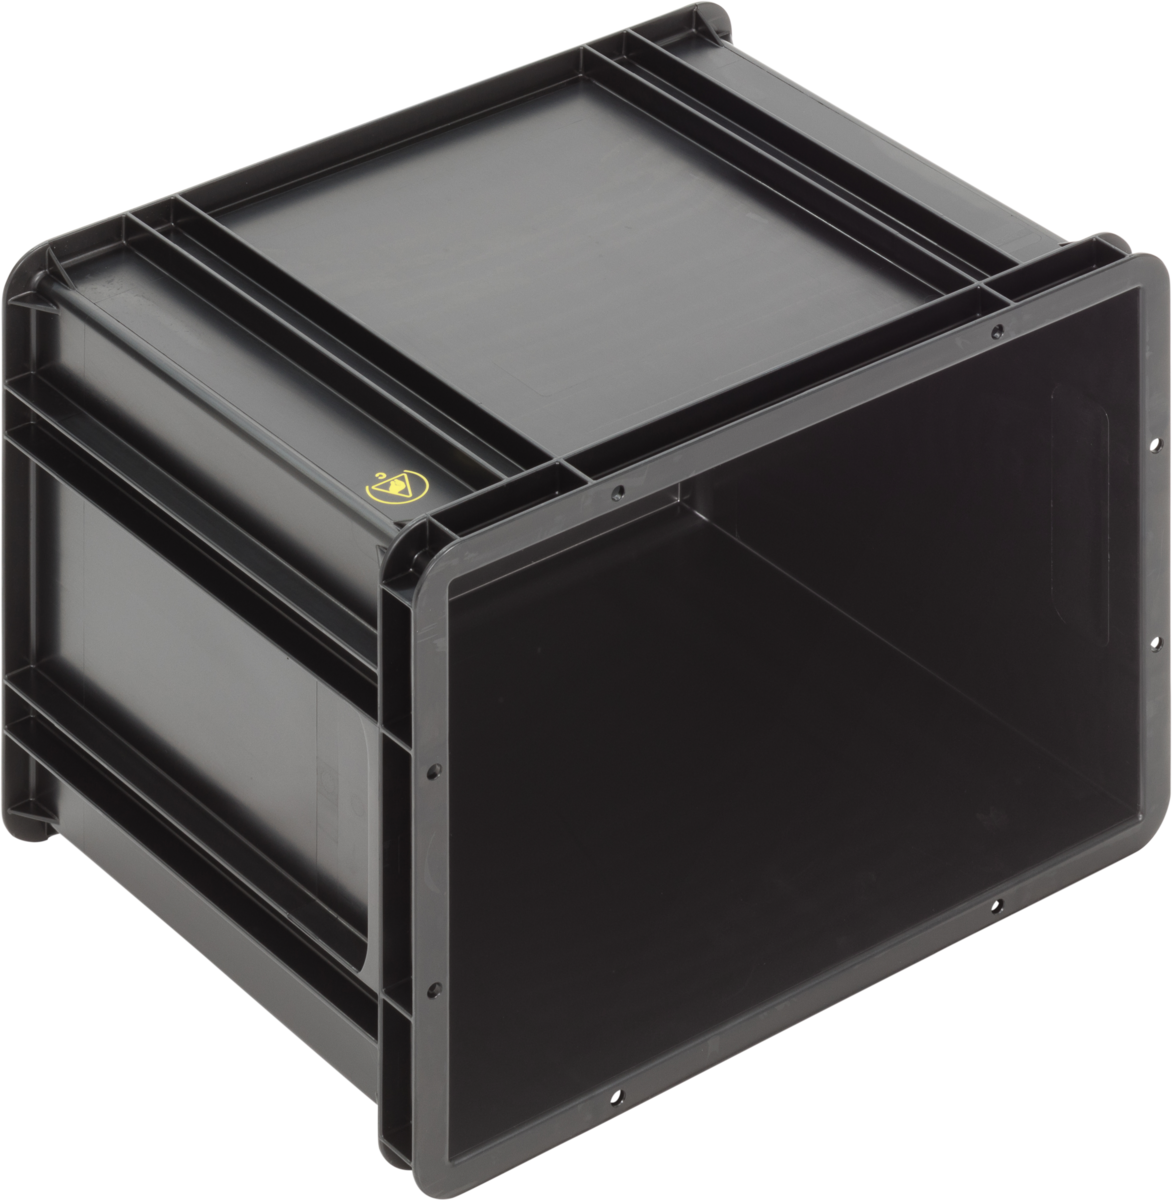 ESD-Safe-SGL-Norm-Stacking-Bin-Containers-Flat-Base-Ref.-4332.007.992_1004410_400x300x320_03